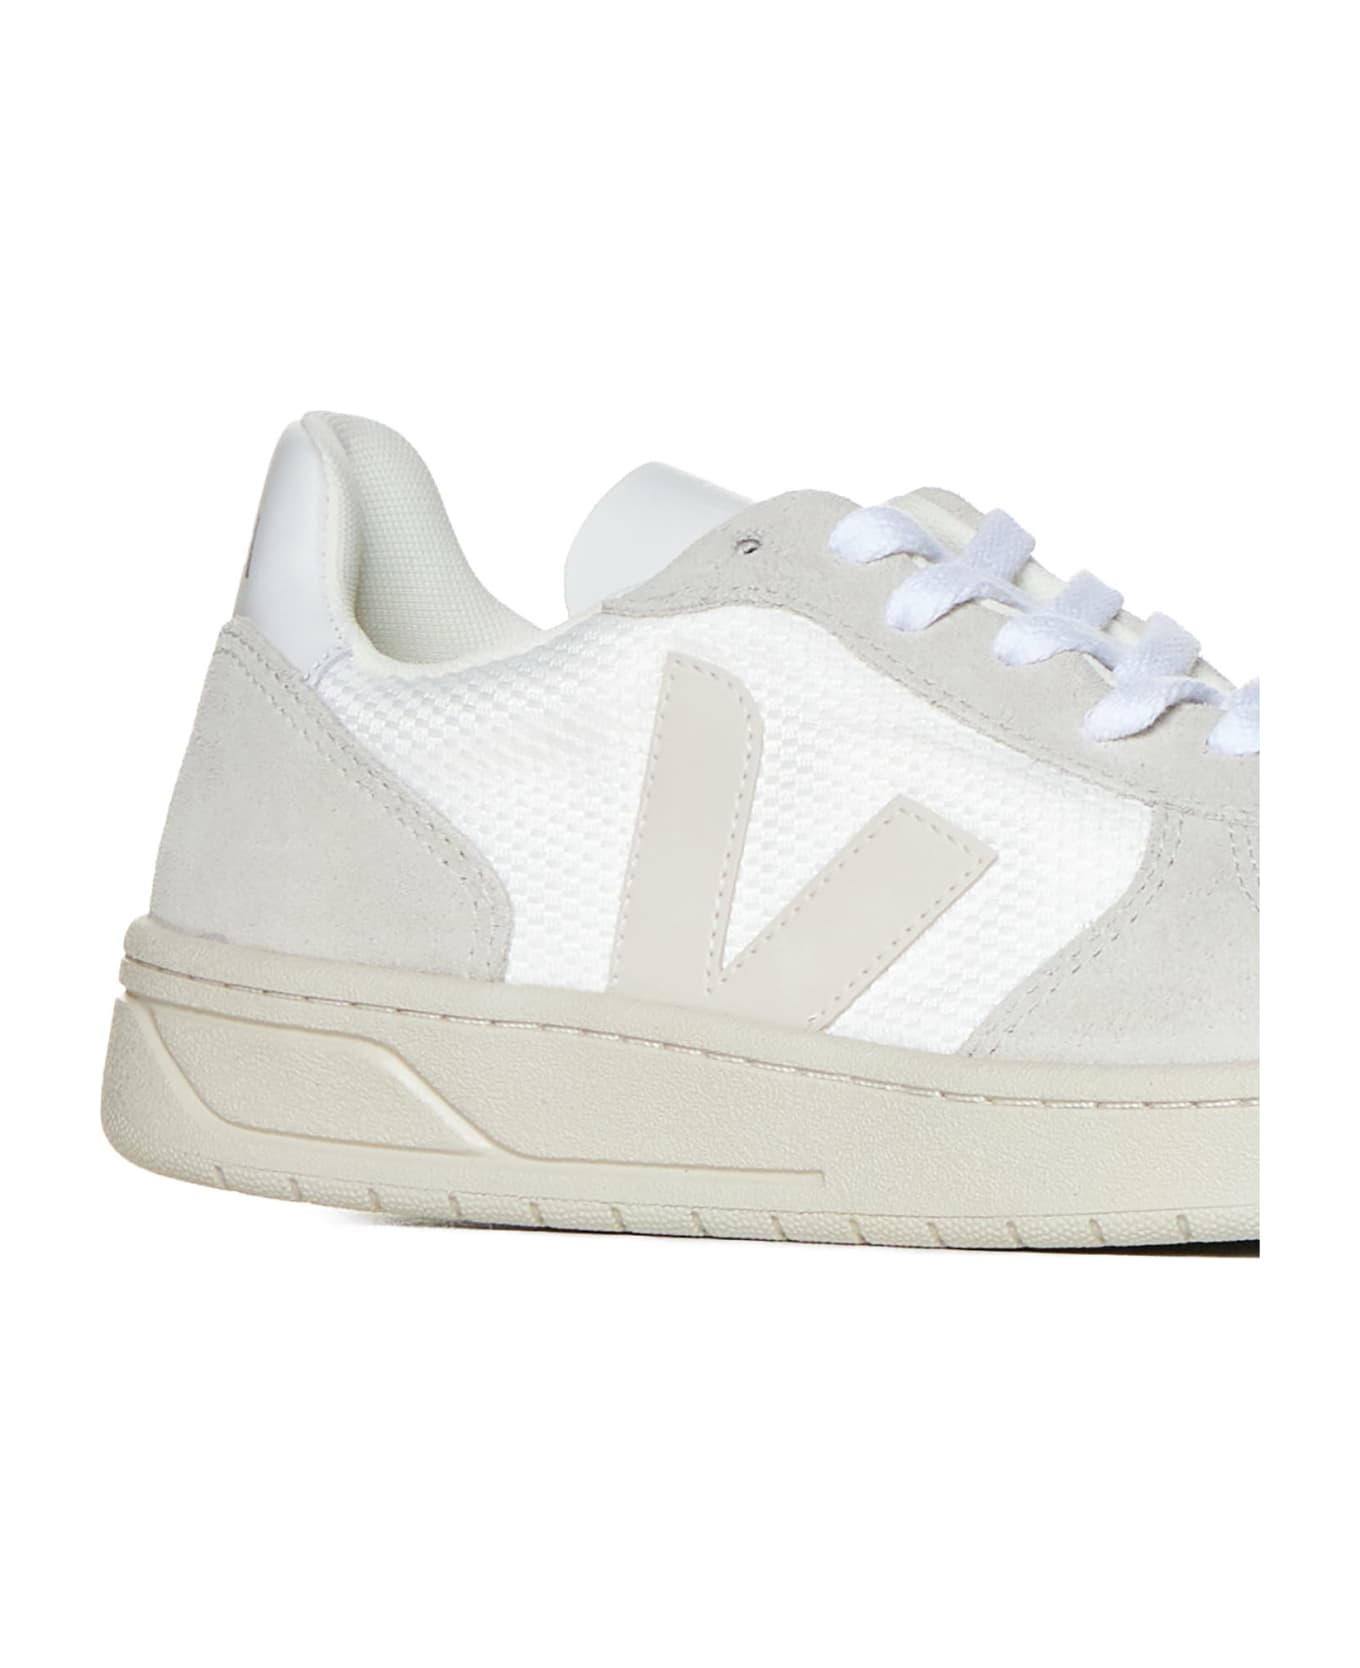 Veja Sneakers - White_natural_pierre スニーカー